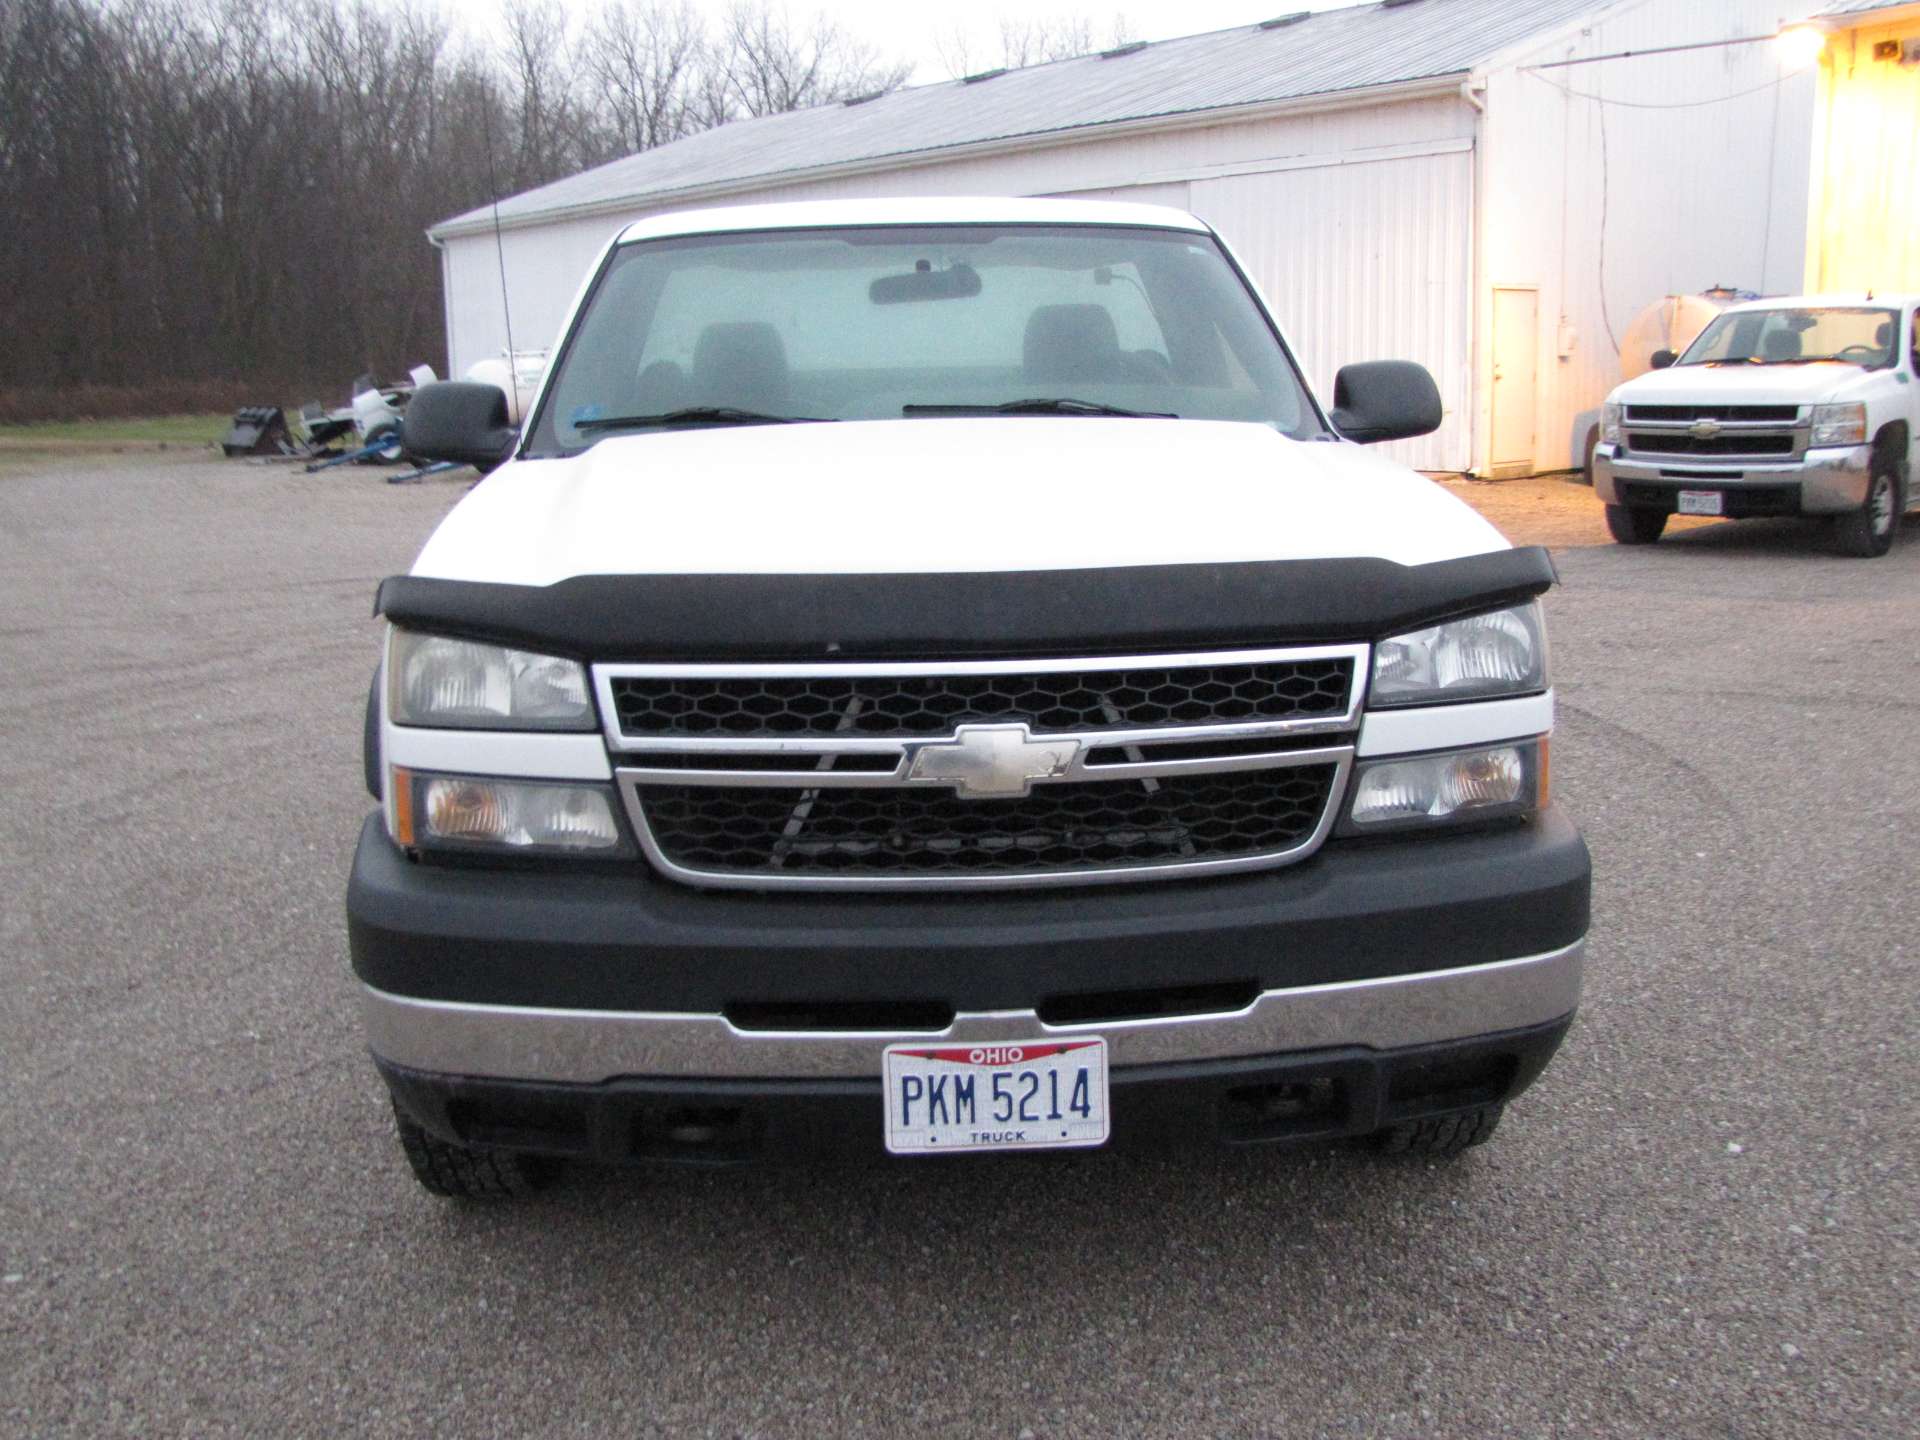 2006 Chevy 2500 HD pickup truck - Image 15 of 65